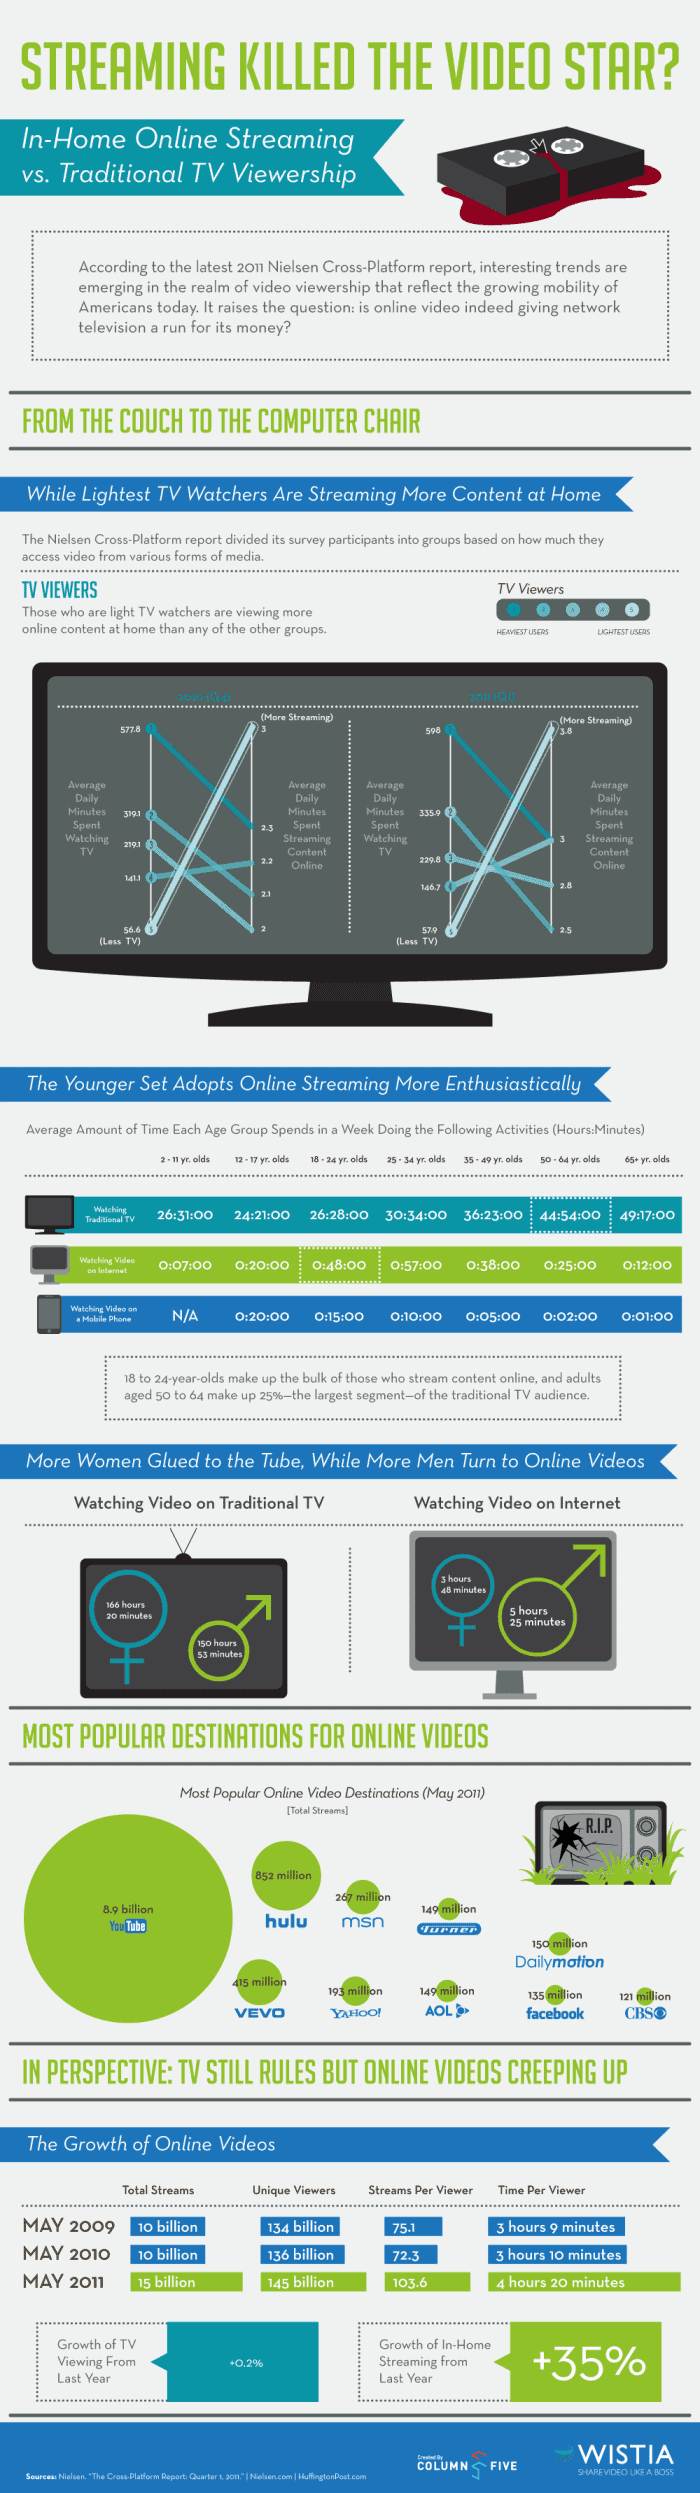 Streaming killed the video star Infographic